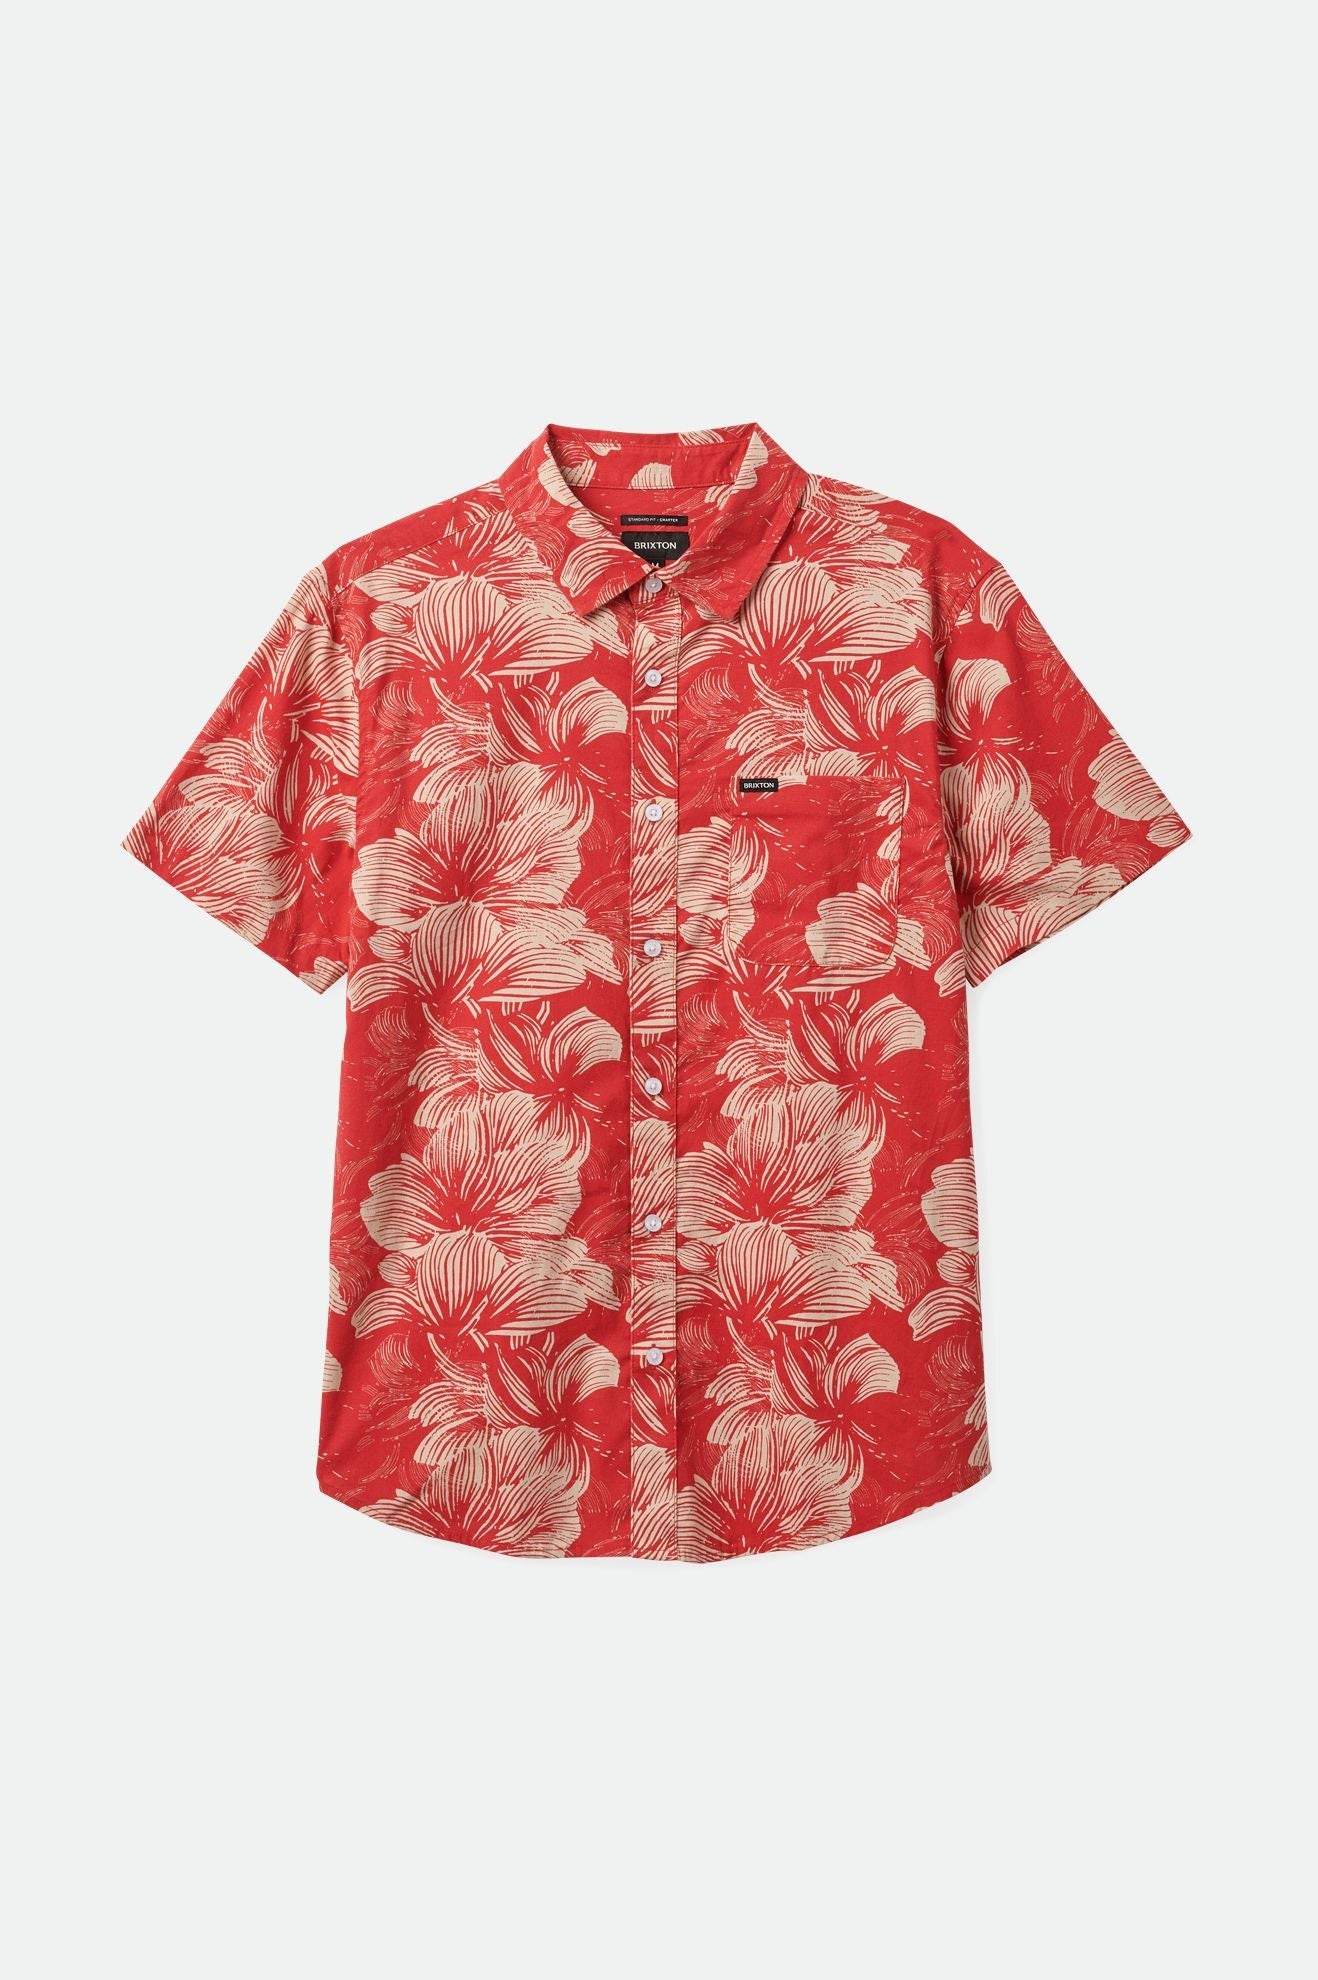 Brixton Casa Red and Oatmilk Floral Charter Printed Short Sleeves Woven Shirt